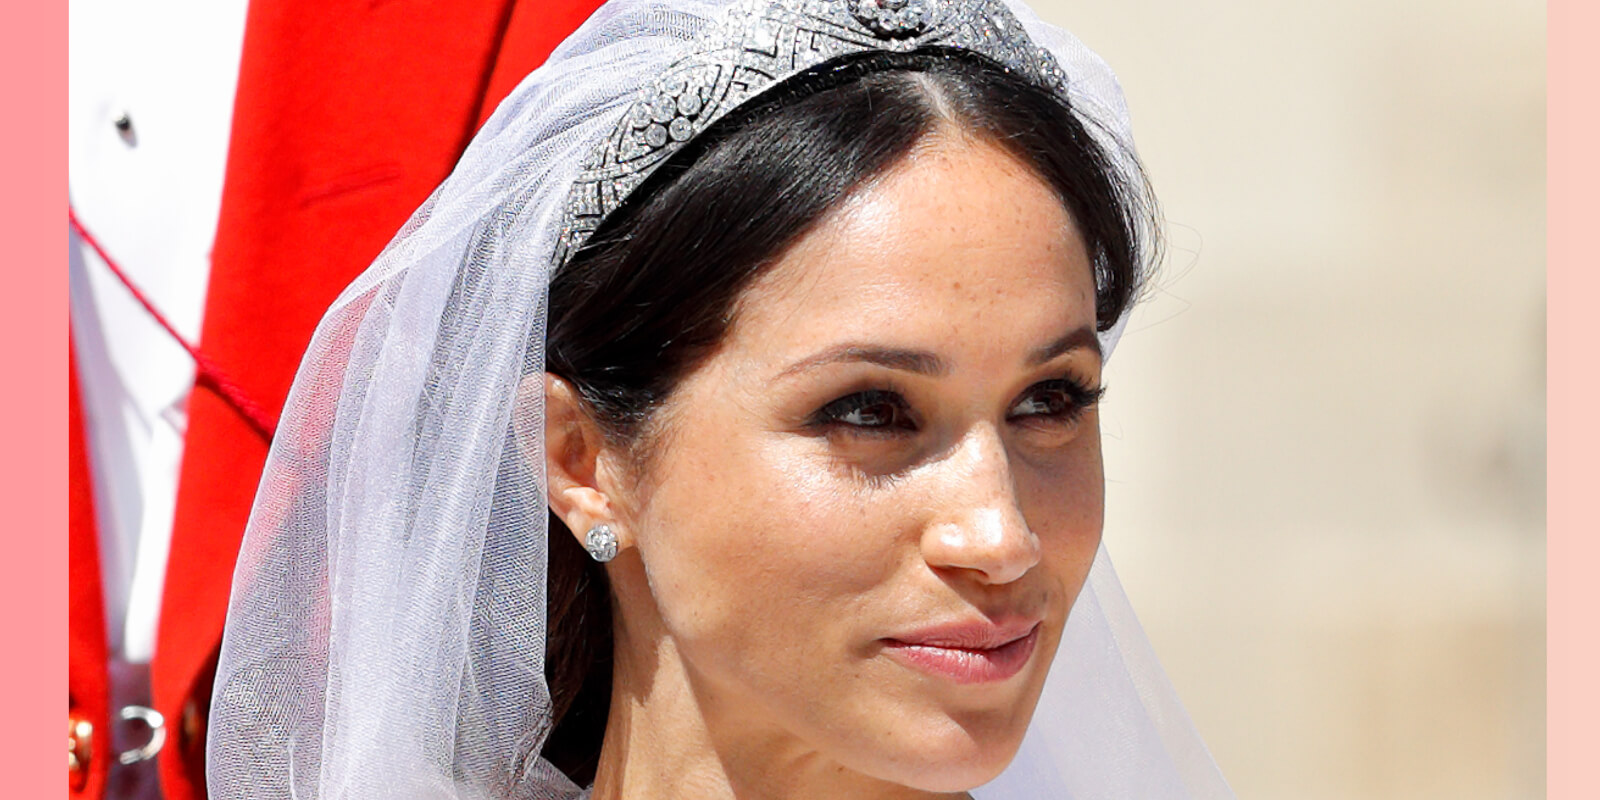 Meghan Markle wore Queen Mary's Diamond Bbandeau Toara for her wedding to Prince Harry in Apr. 2018.